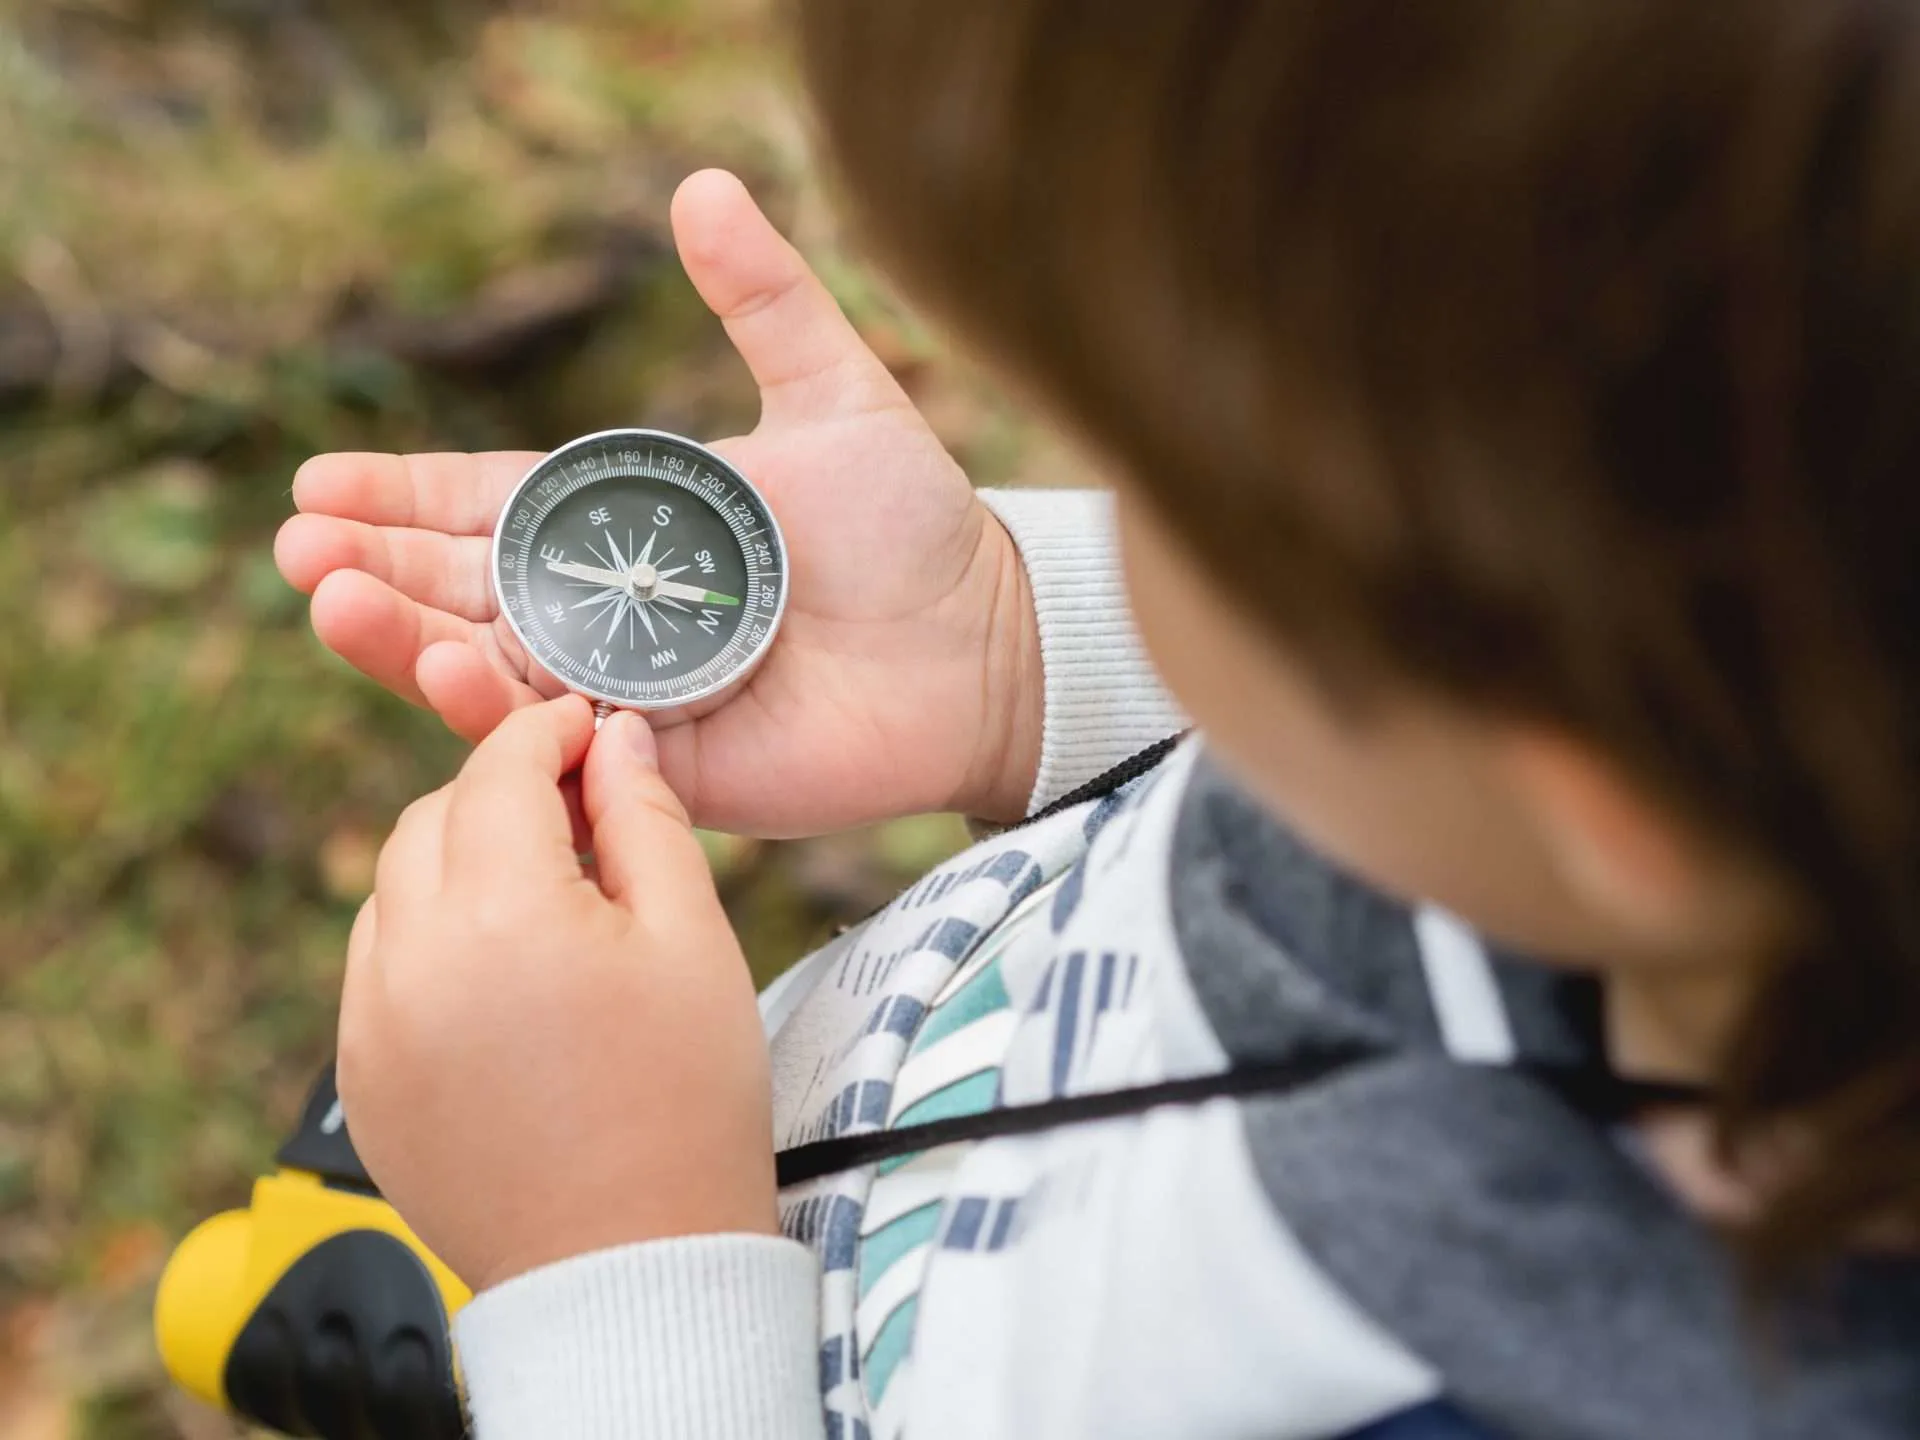 Little boy learning to use a compass